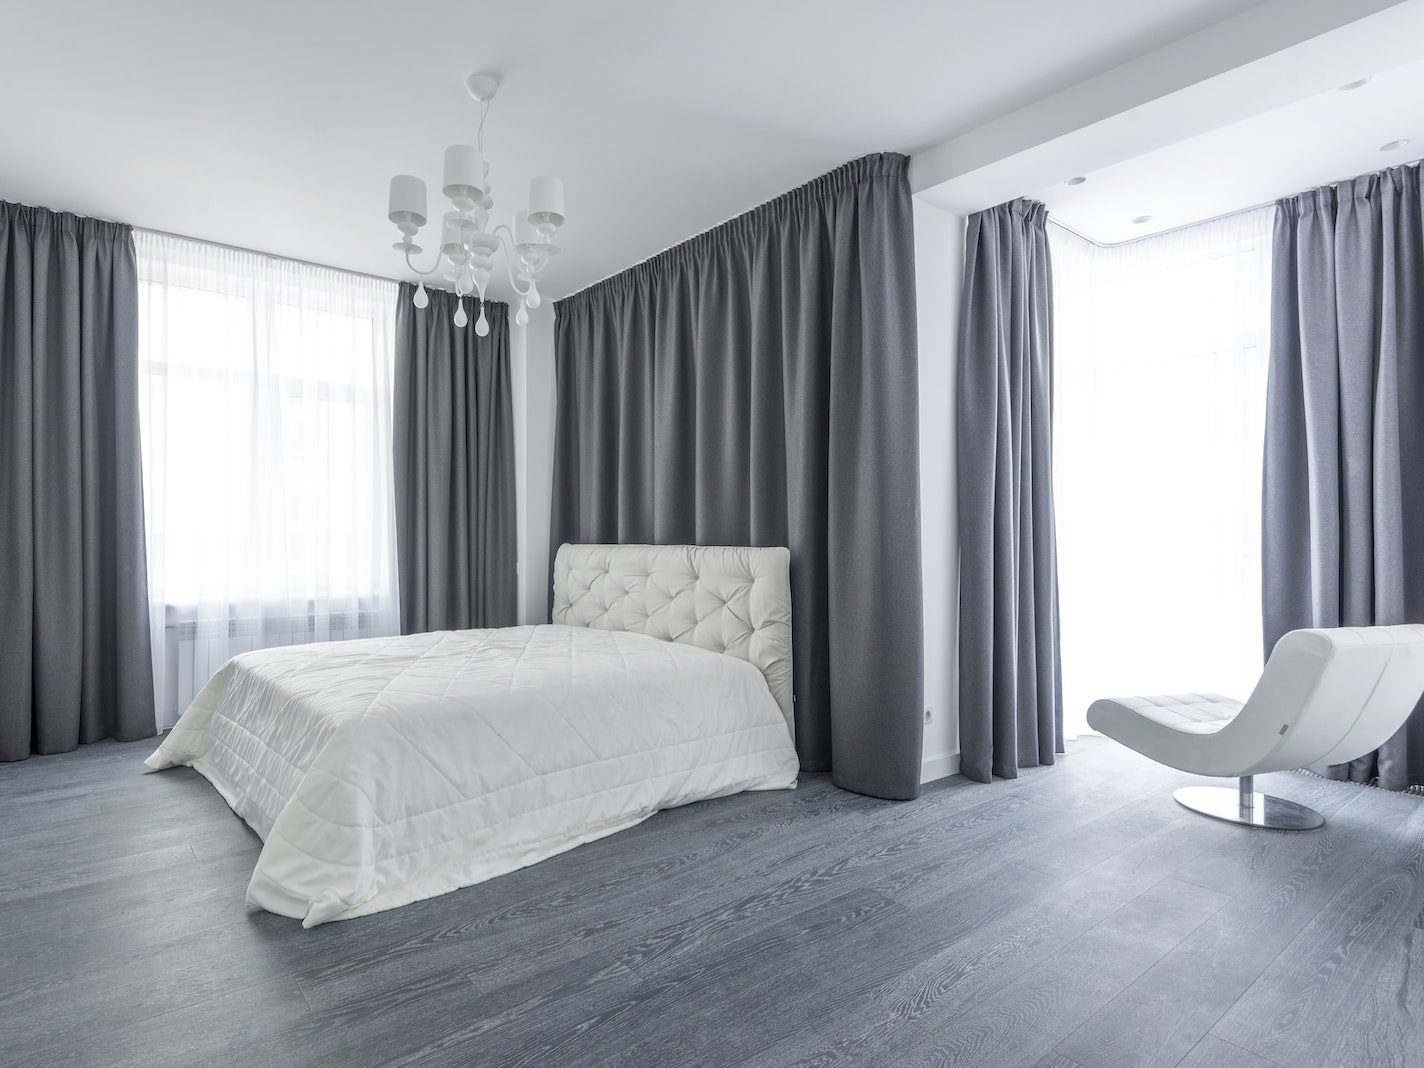 White Bed in a Bedroom With Gray Curtains